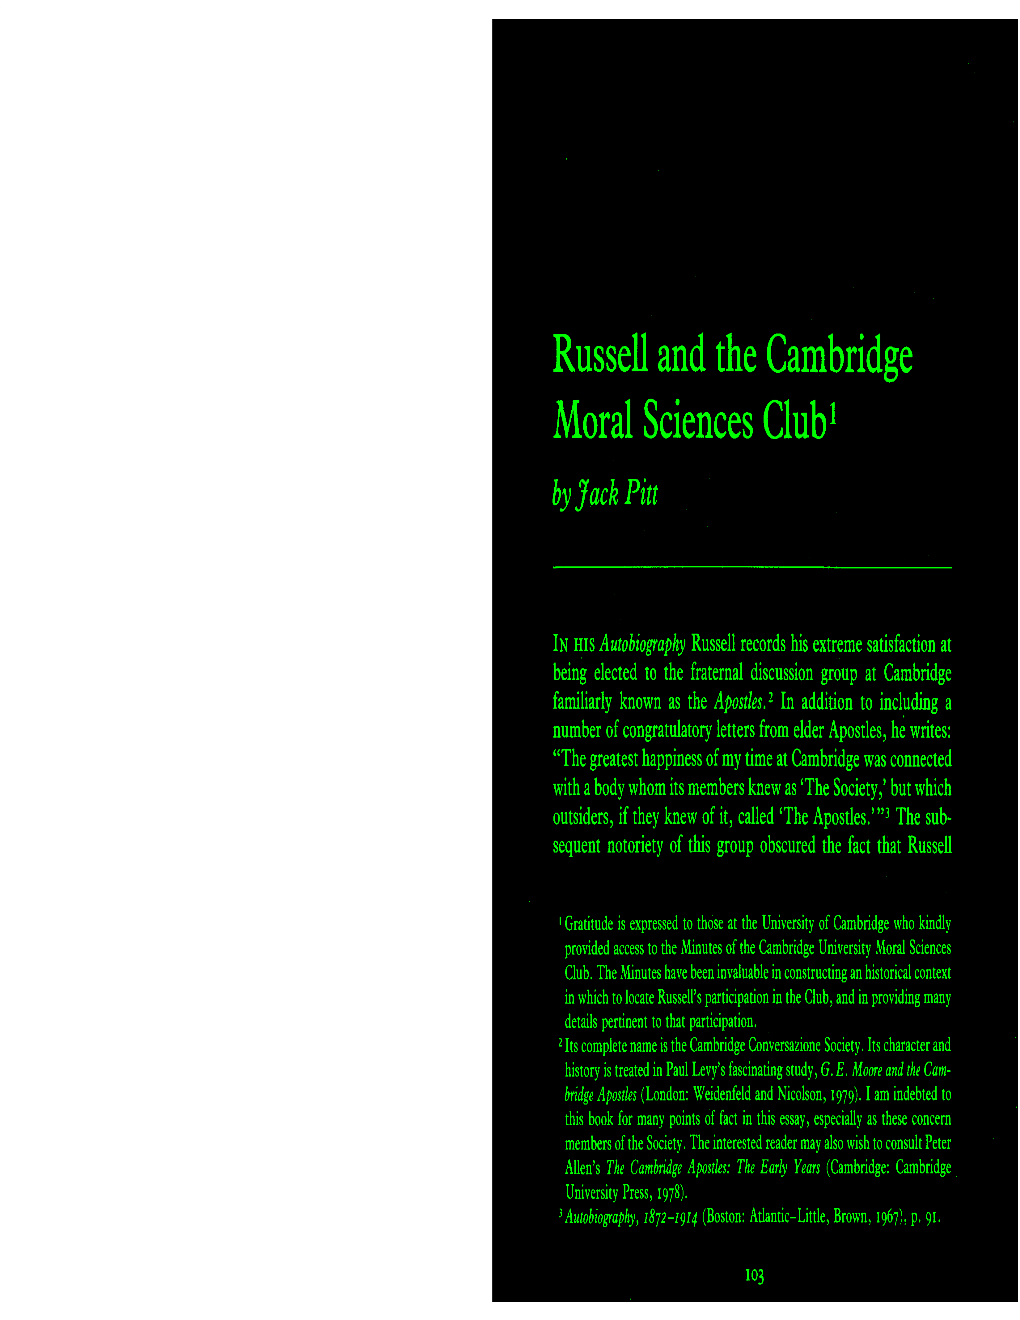 Russell and the Cambridge Moral Sciences Club L by Jack Pitt